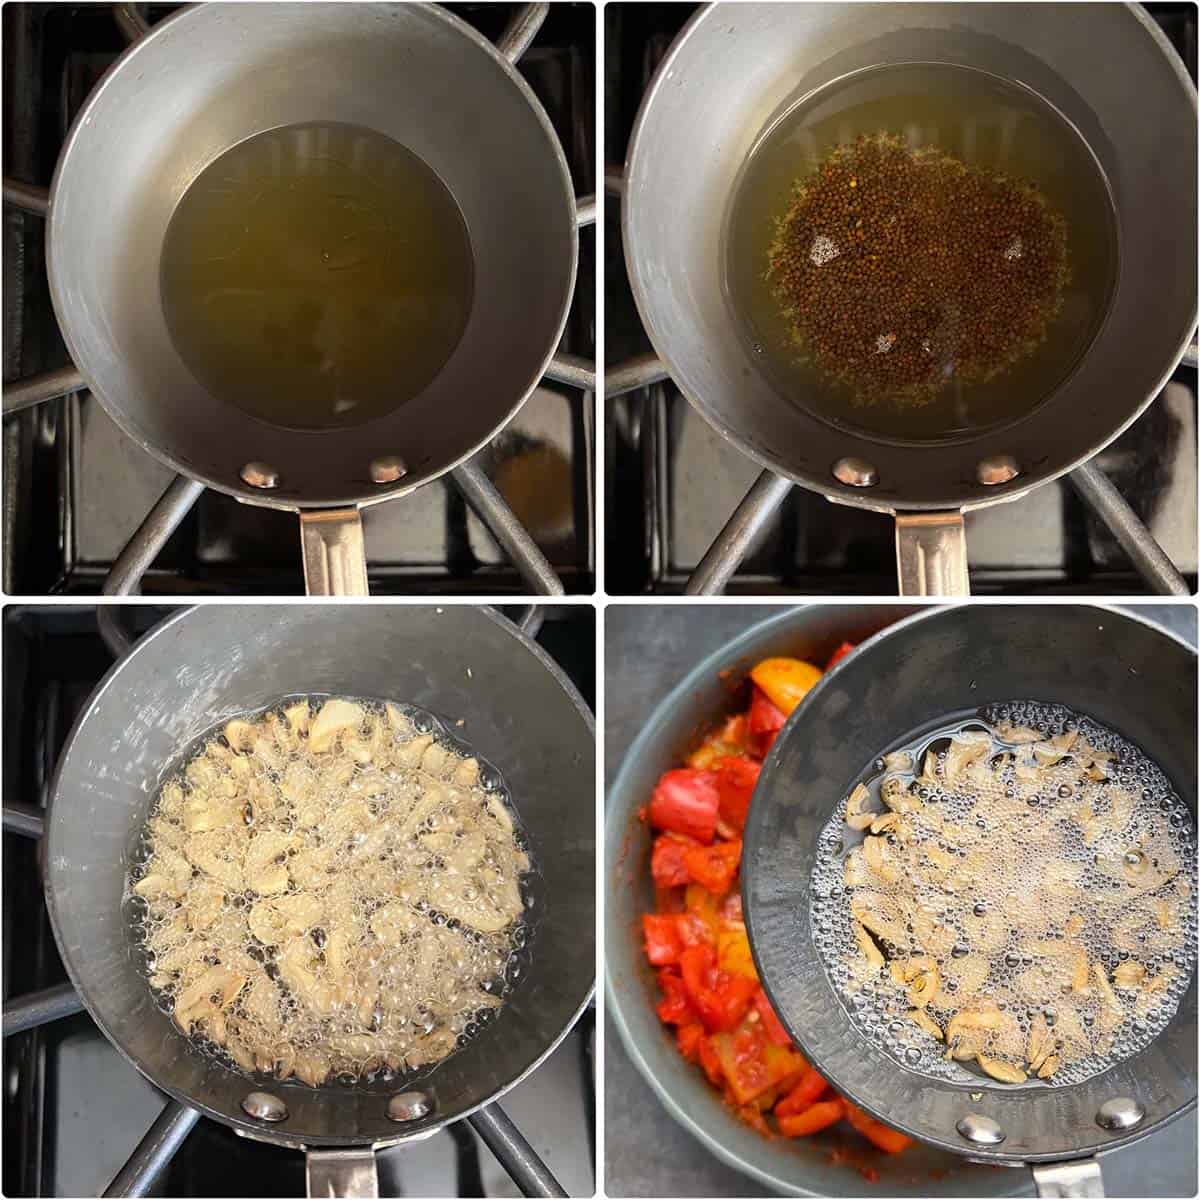 4 panel photo showing the making of tempering with garlic.